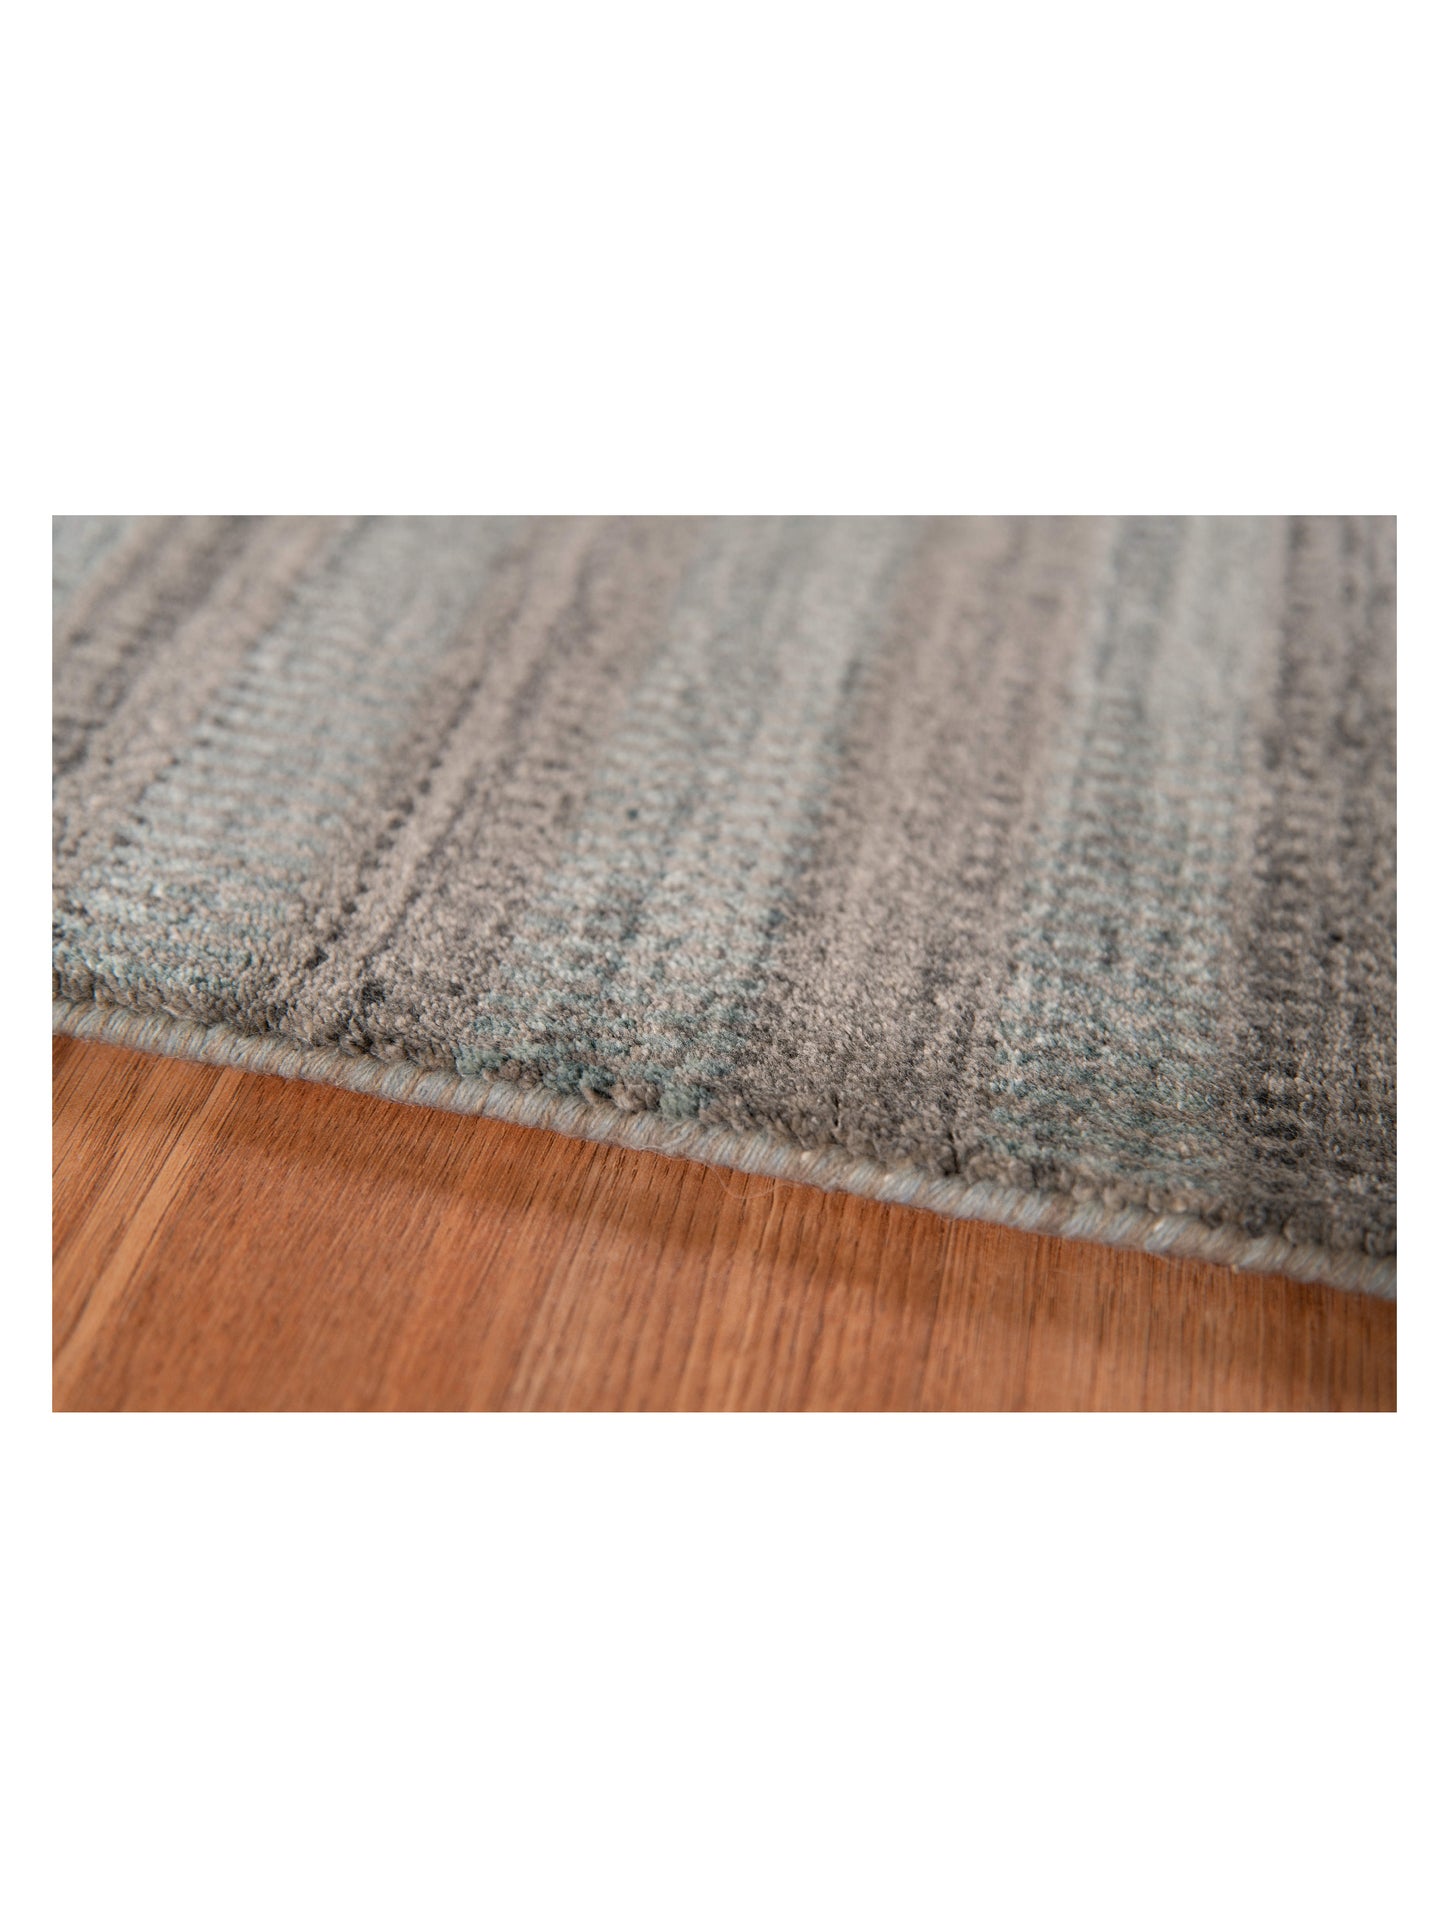 Limited REDCLIFFE RD-805 SILVER GRAY Transitional Woven Rug